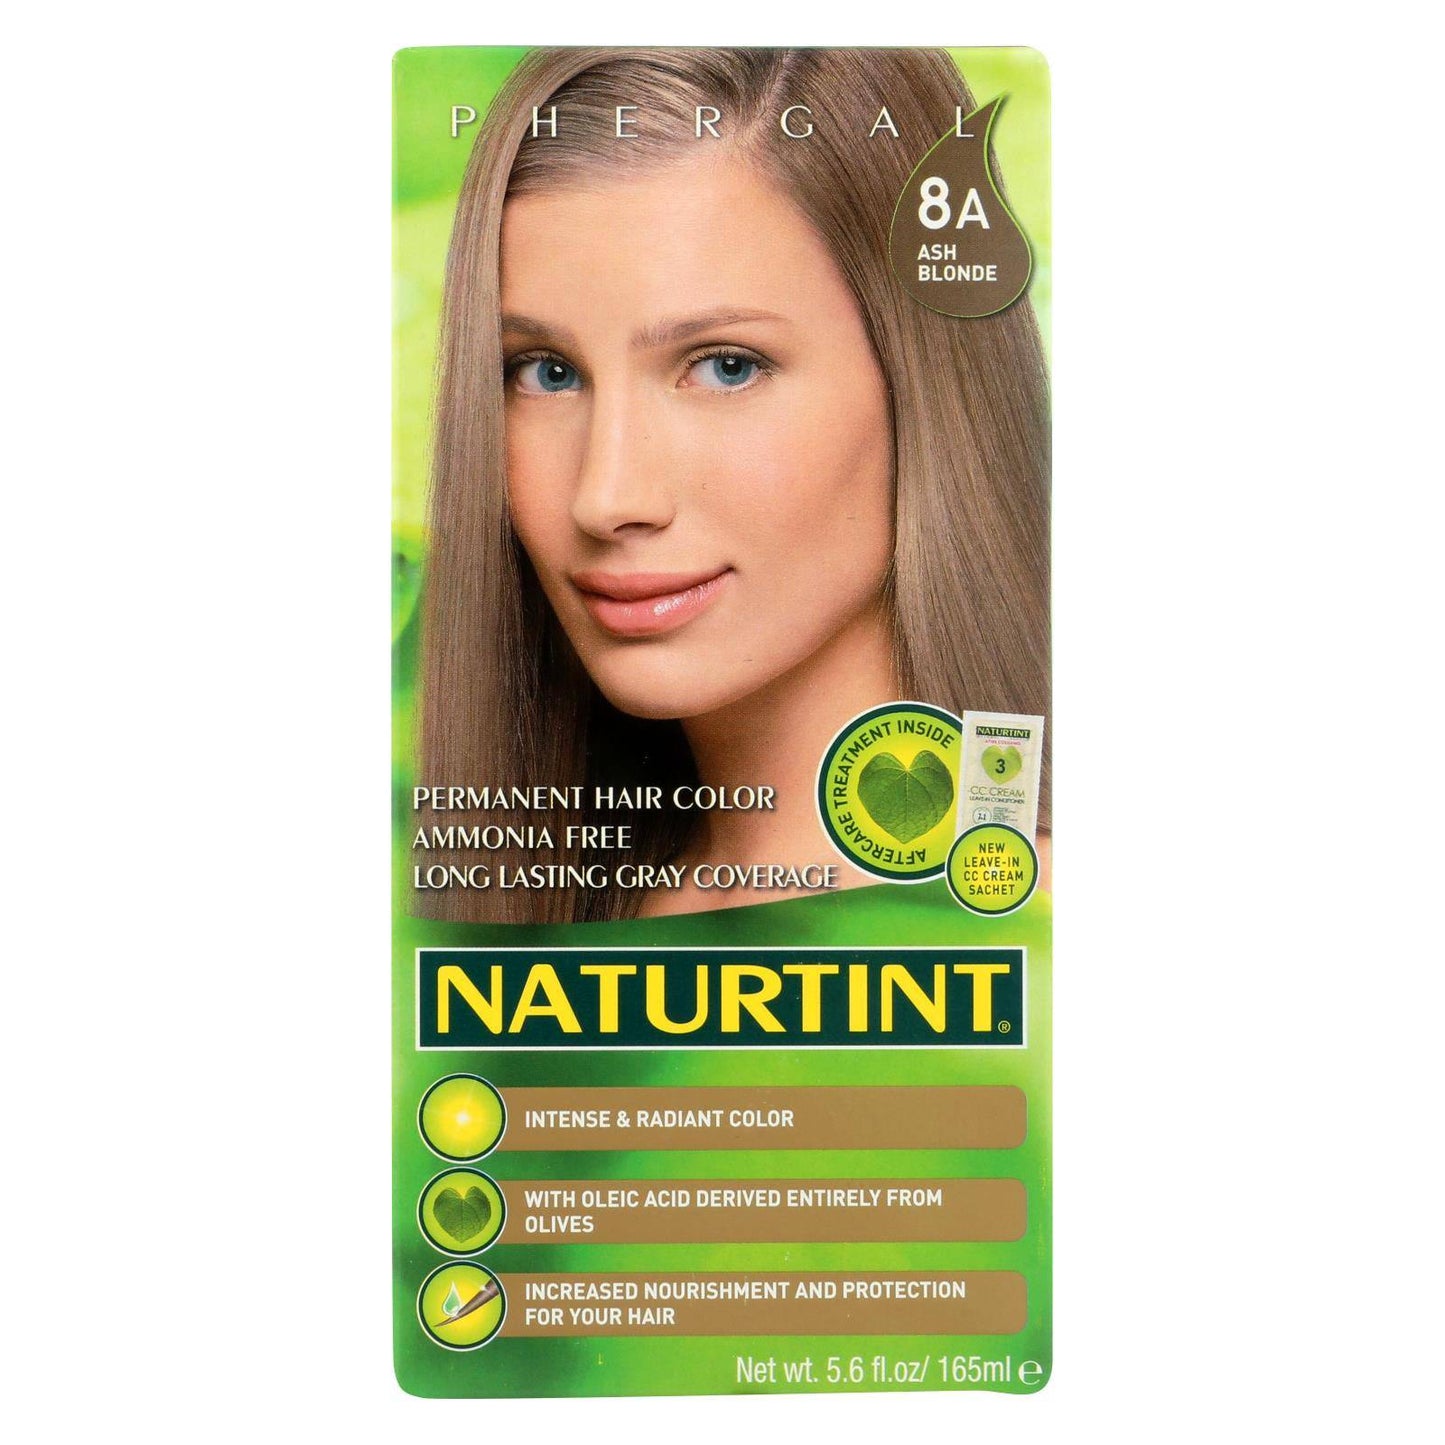 Buy Naturtint Hair Color - Permanent - 8a - Ash Blonde - 5.28 Oz  at OnlyNaturals.us